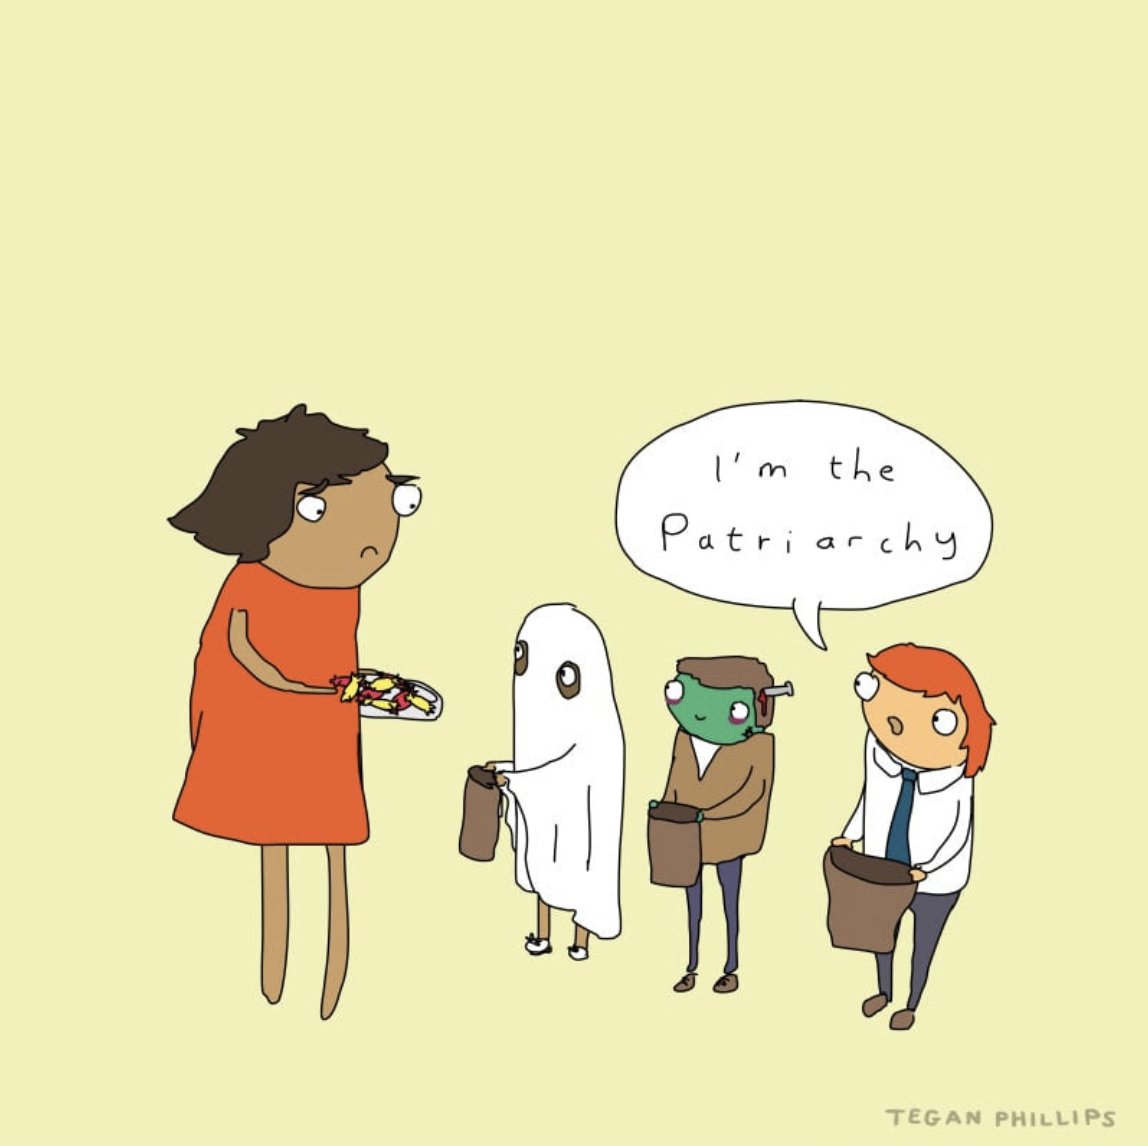 This one still cracks me up.
Trick or treat!
Smell my feet!
Give me something good to eat because #maleprivilege and #patriarchy!
#HappyHalloween!